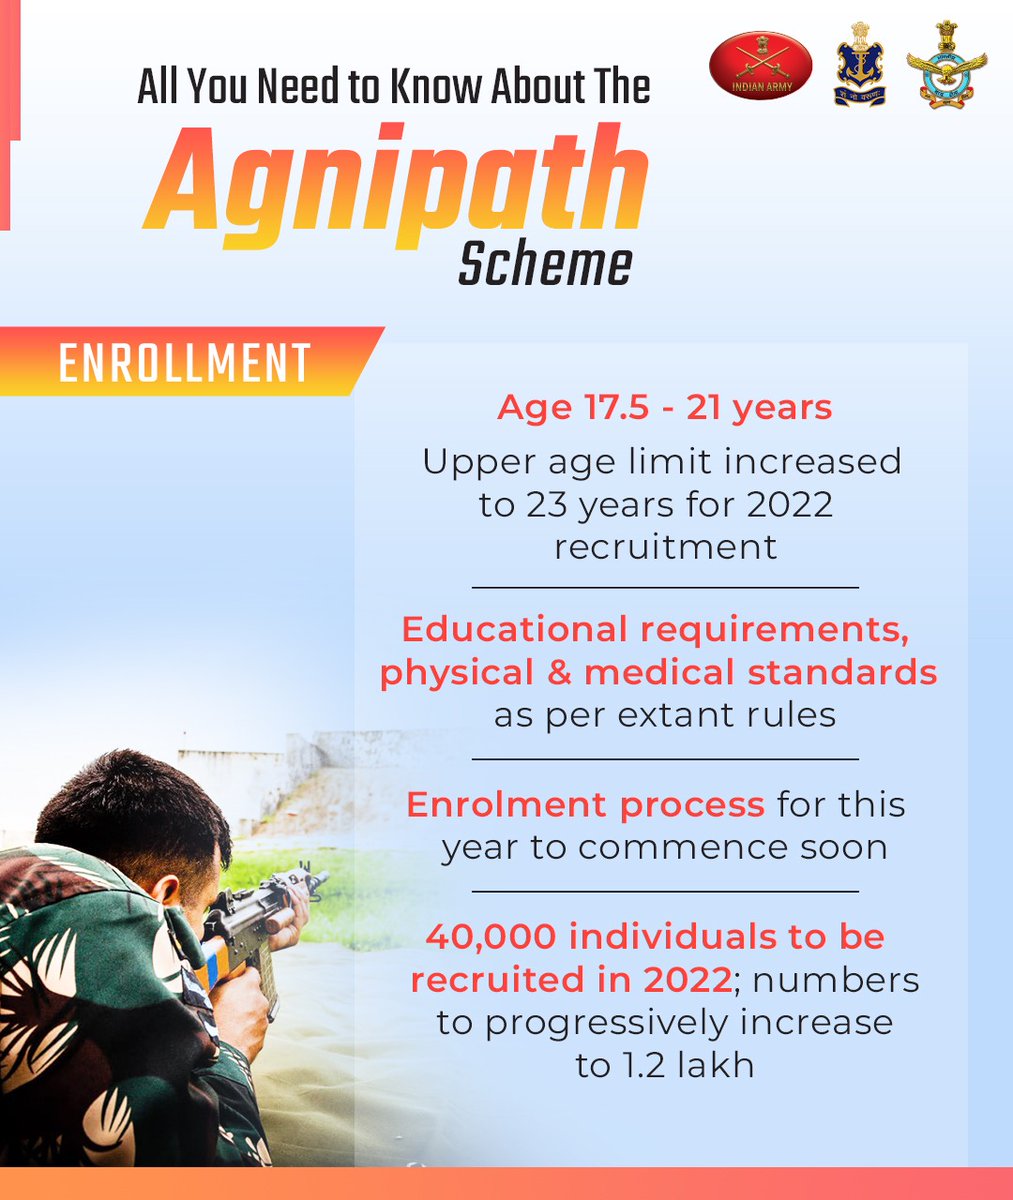 All You need to know about the Agnipath Scheme

#Agniveers
#Agnipath #BharatKeAg…